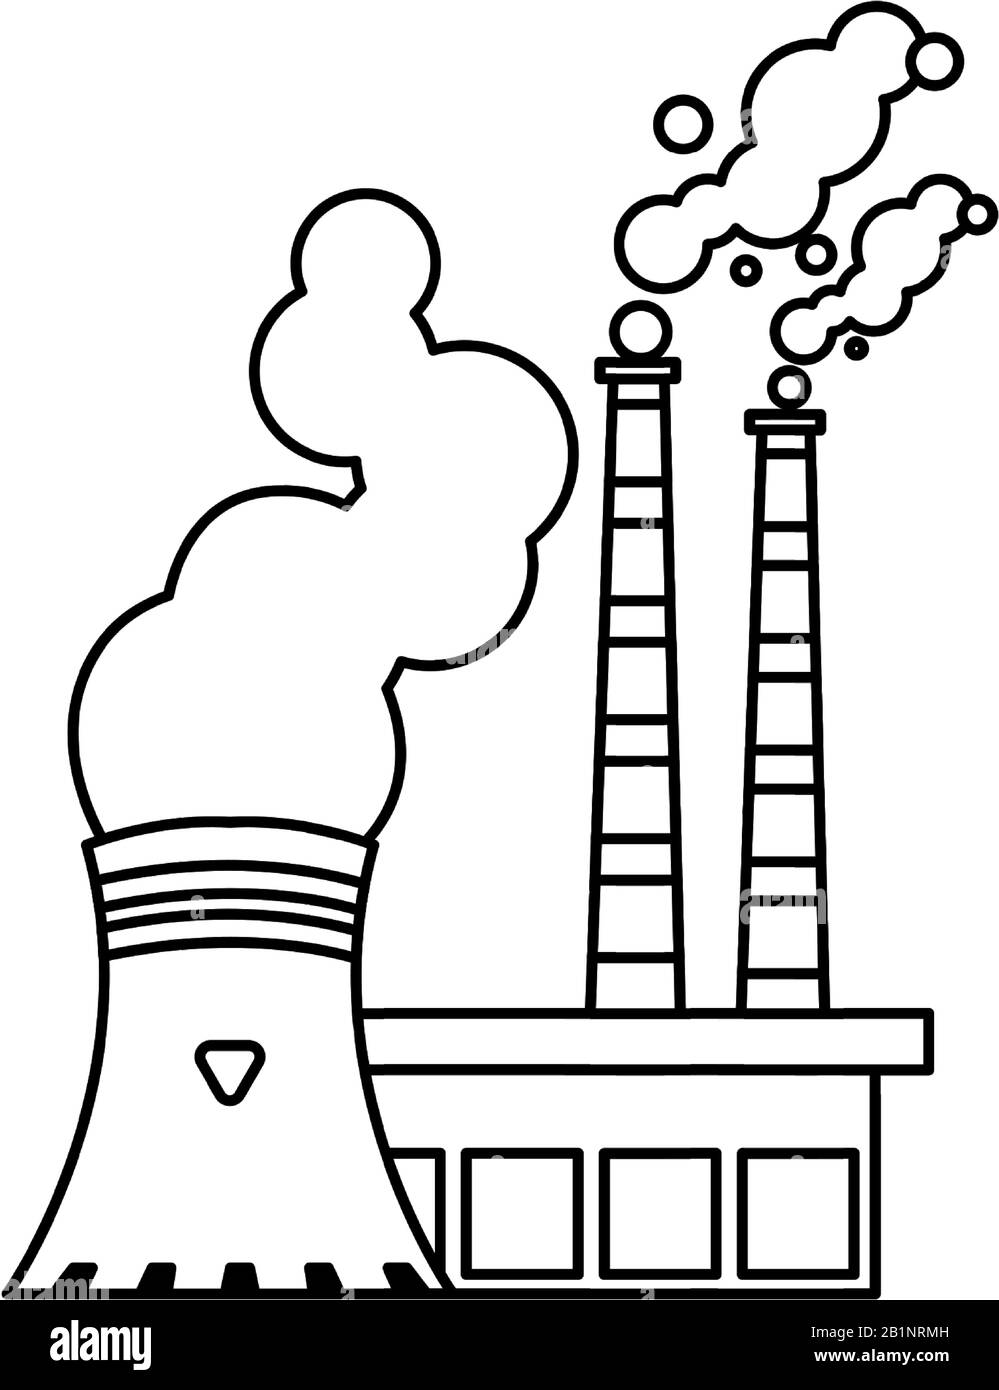 nuclear reactor with smoke clouds on white background vector ...